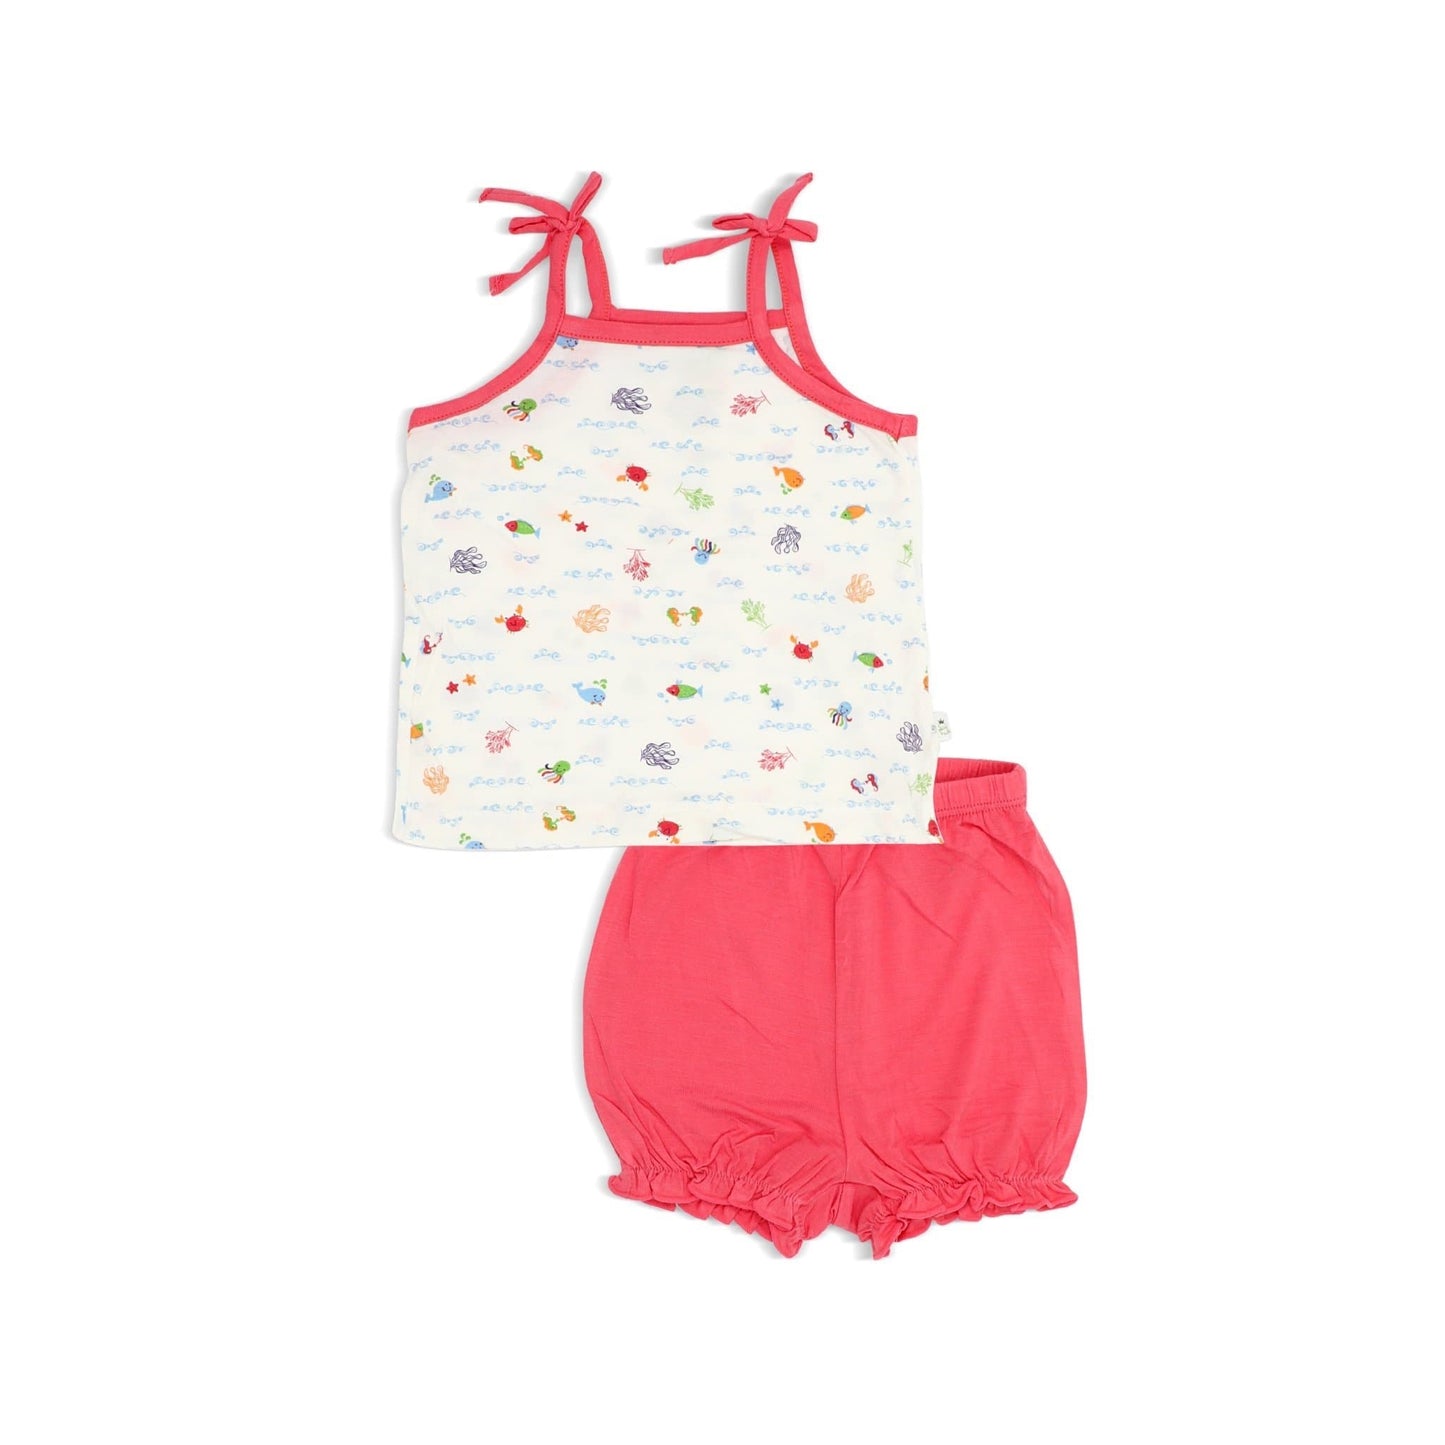 Sea World - Blouse with Spaghetti Tie & Bloomer Shorts Set by simplylifebaby